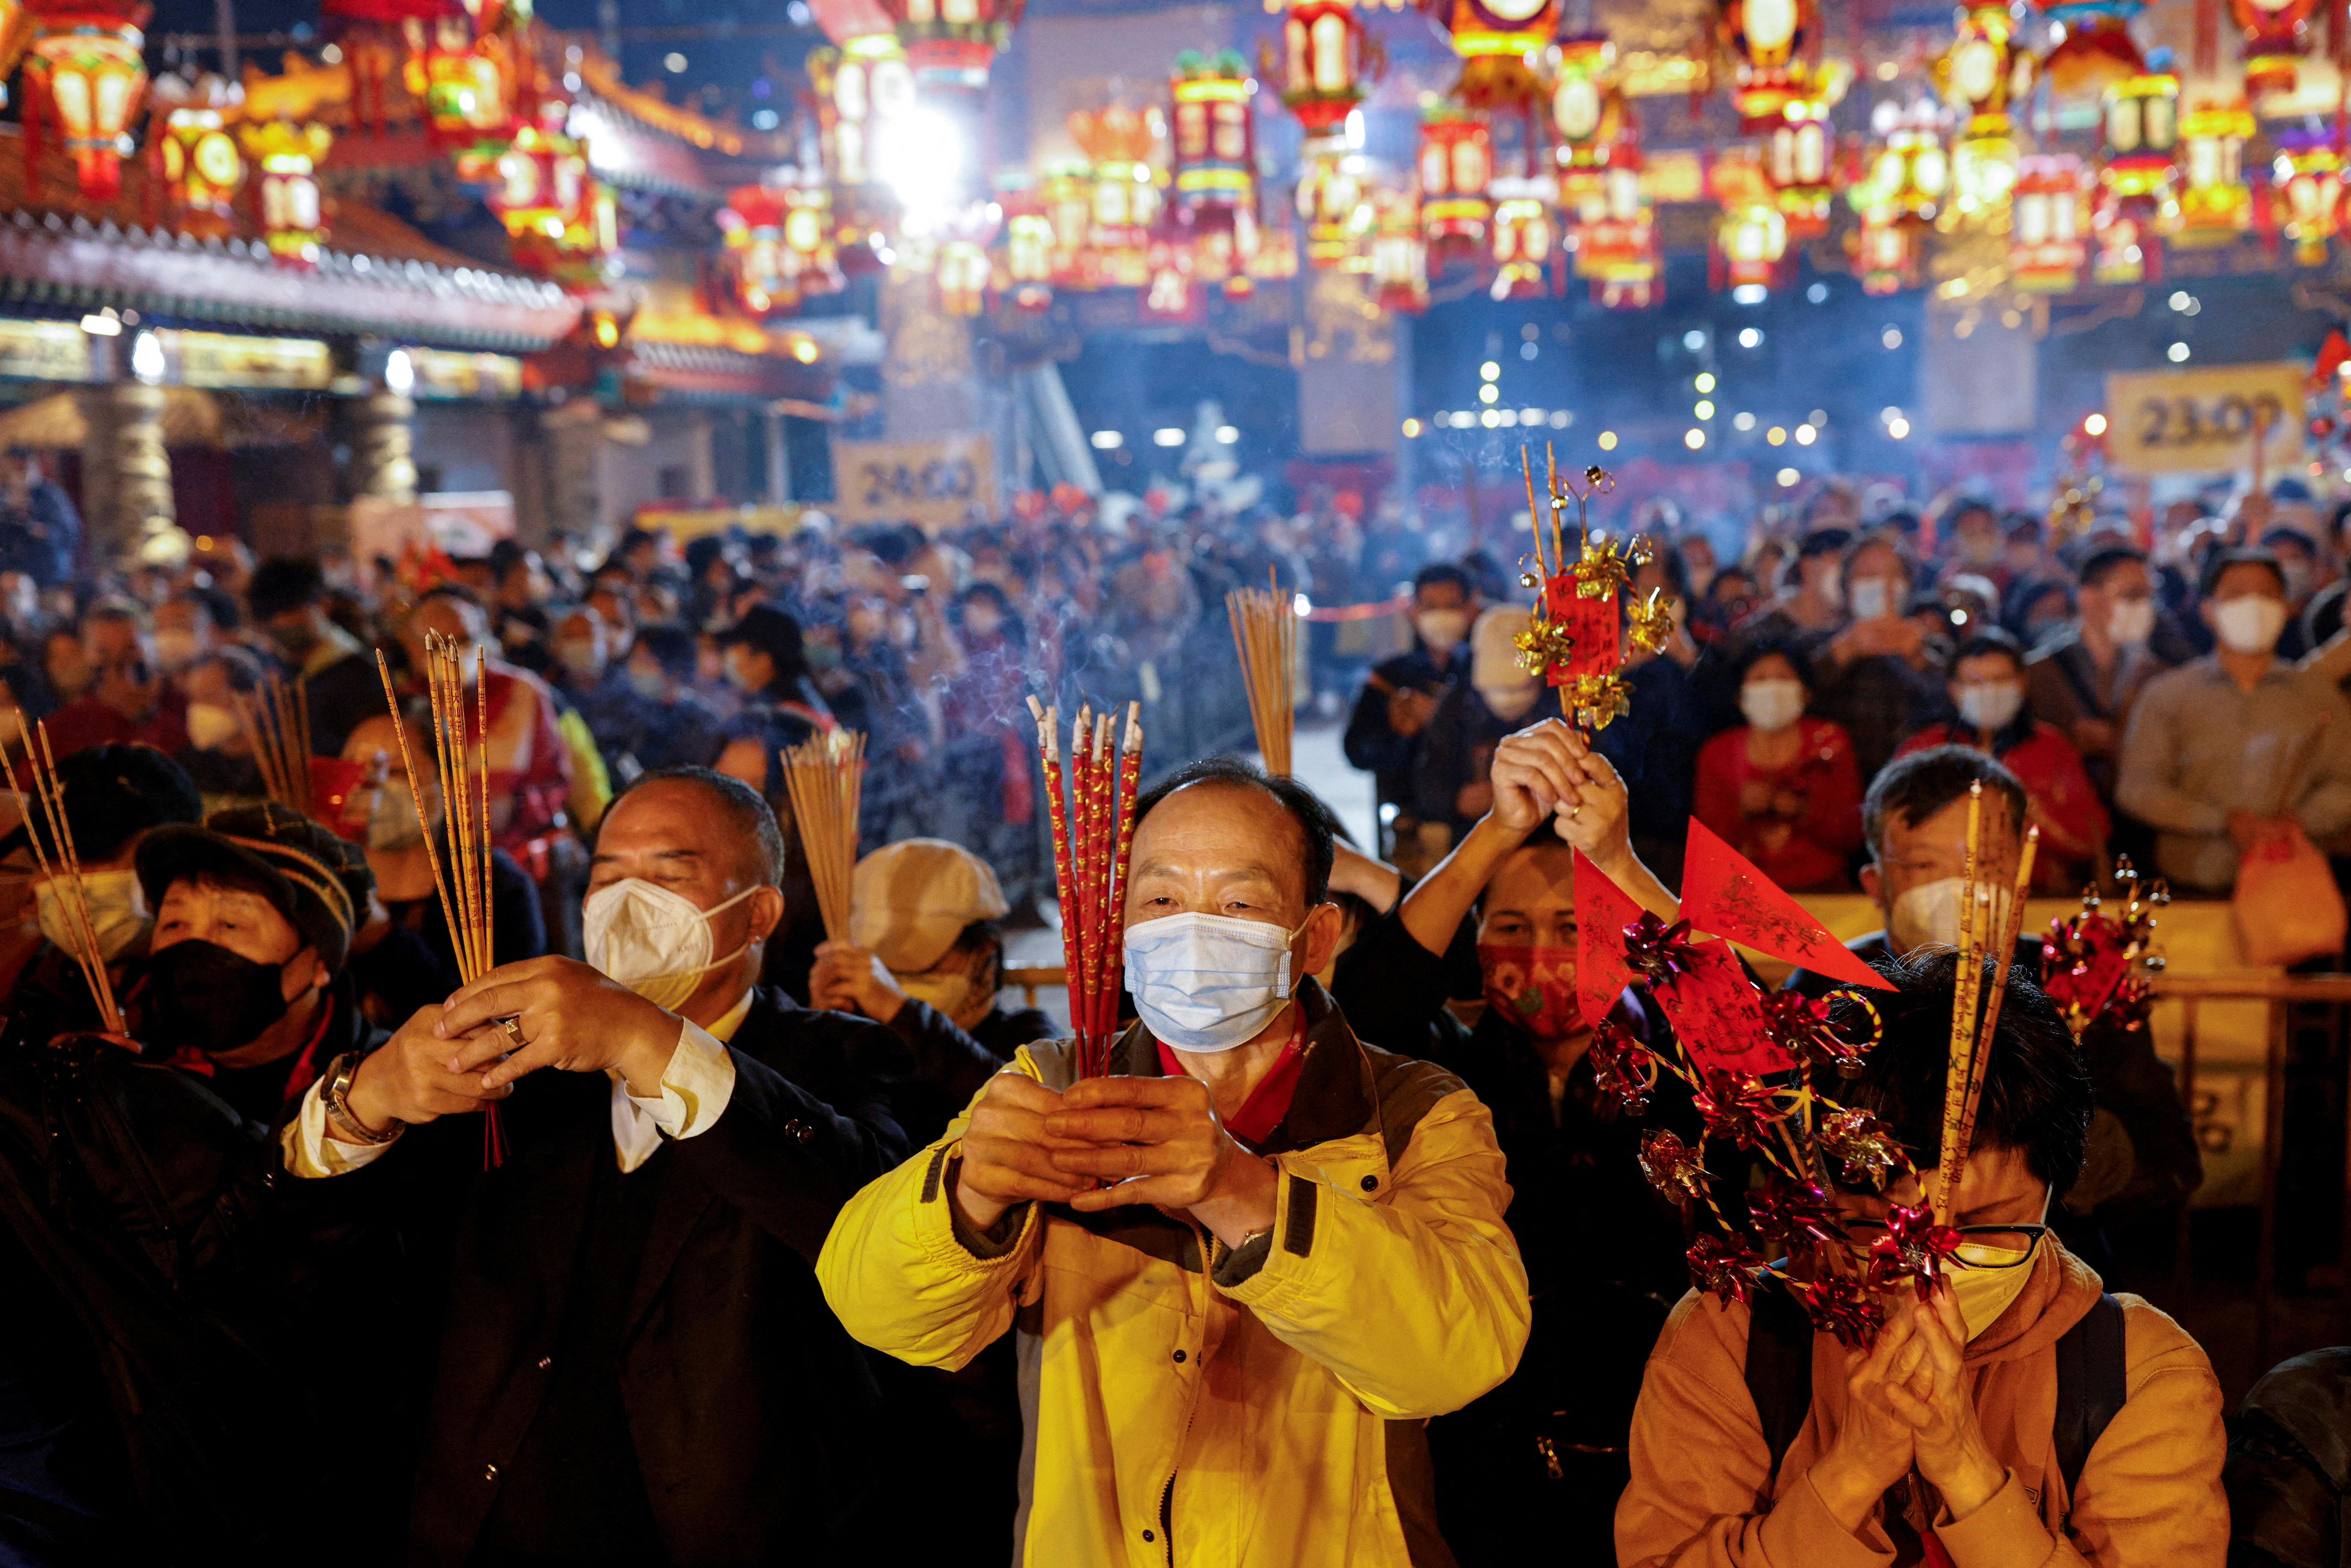 Devotees make their offerings inside the Wong Tai Sin Temple to celebrate the Lunar New Year, Hong Kong